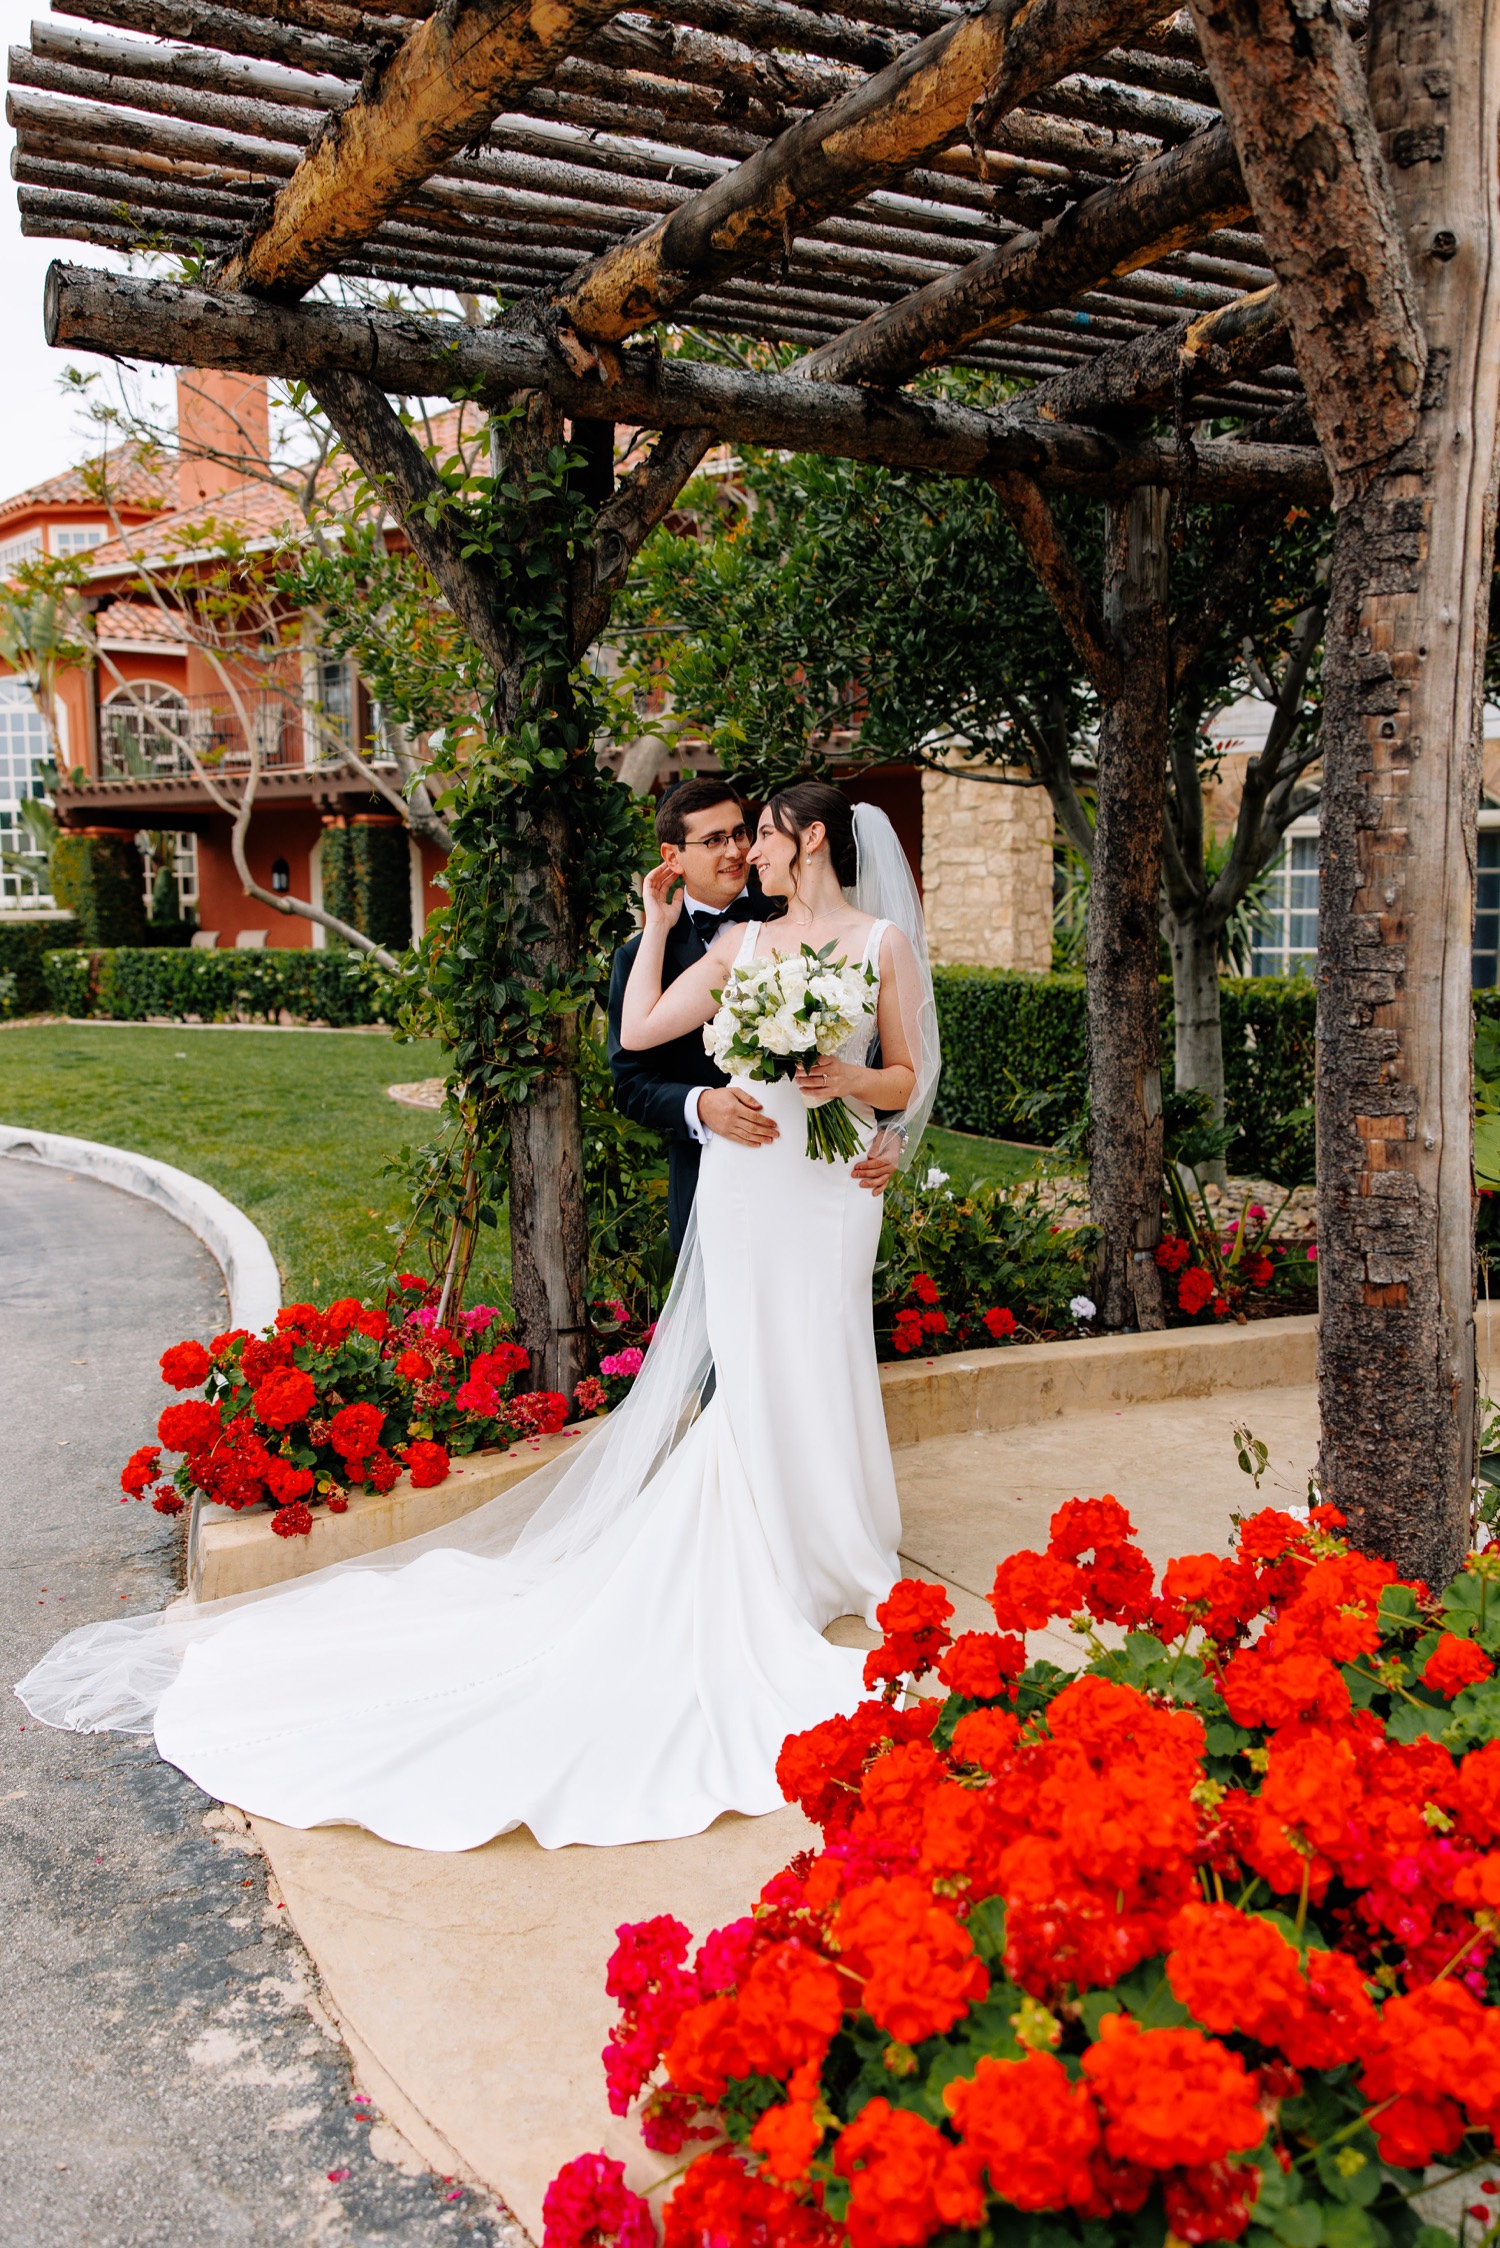 Westlake Village Inn Wedding photographed by Magaly Barajas Photography